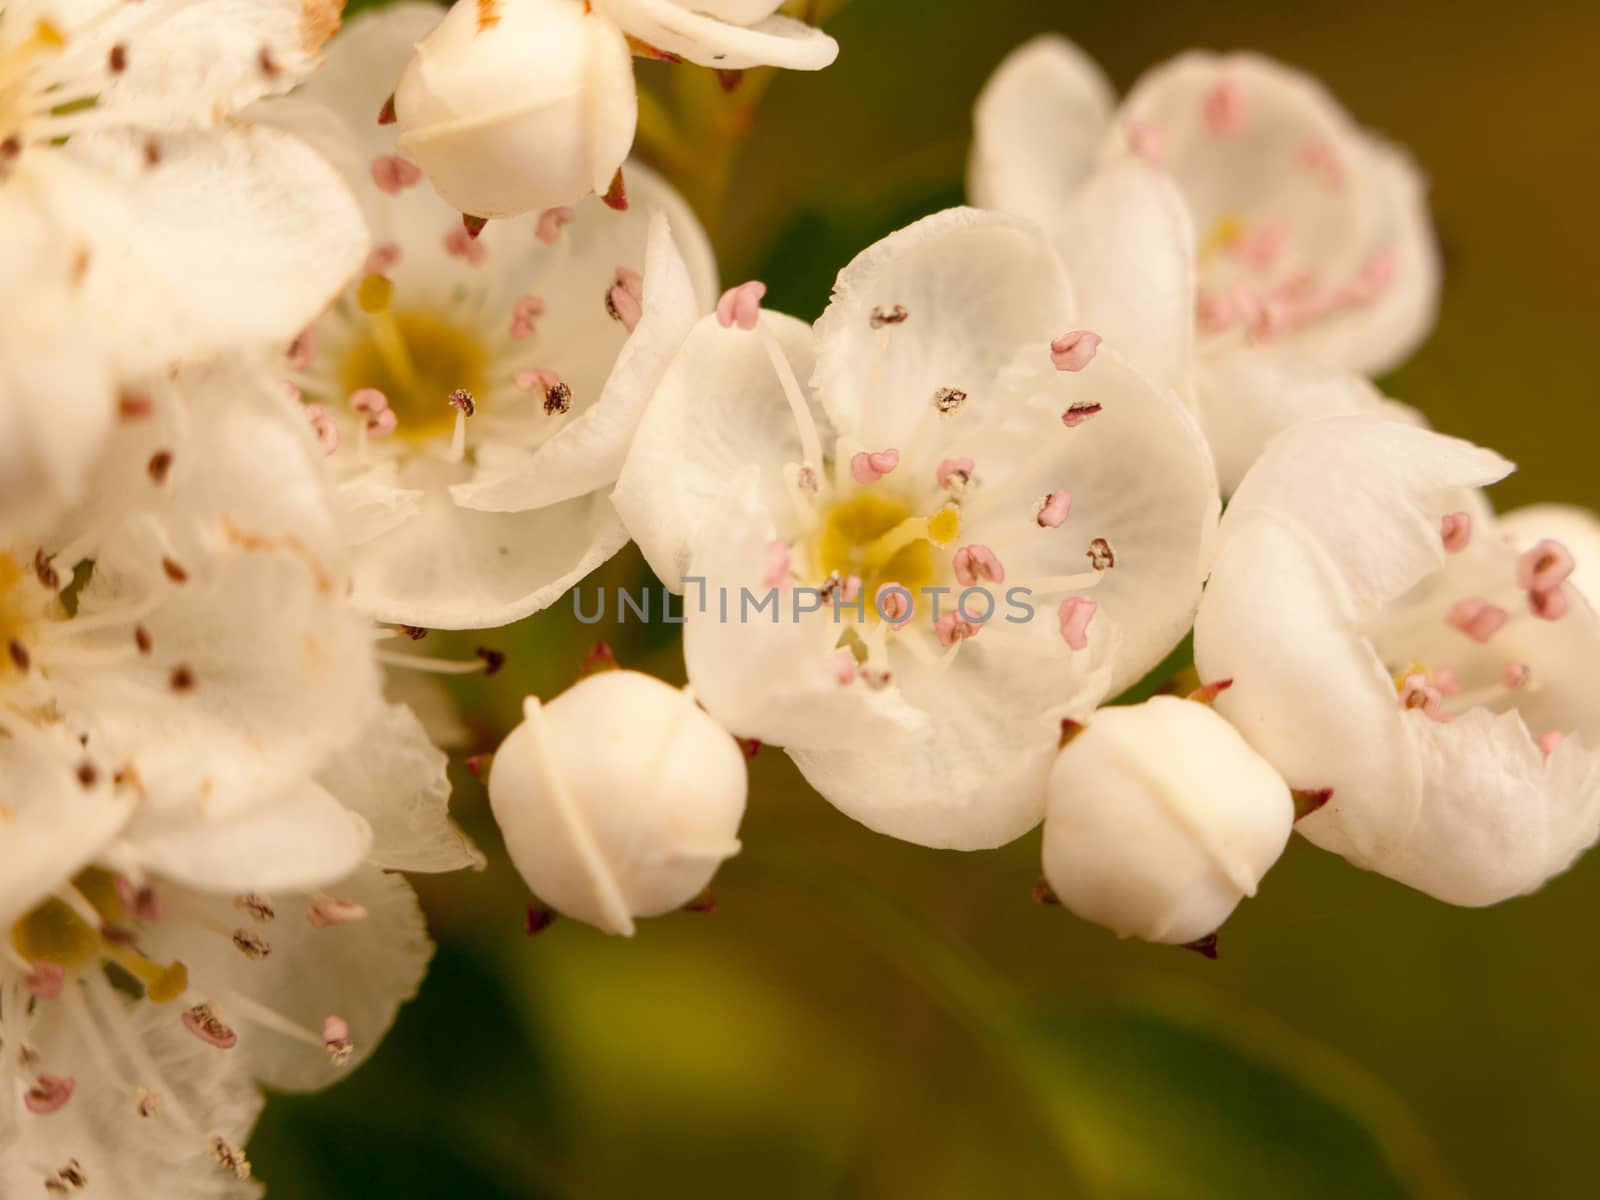 beautiful tree blossom pink and yellow and white close up detail pretty sharp and vibrant